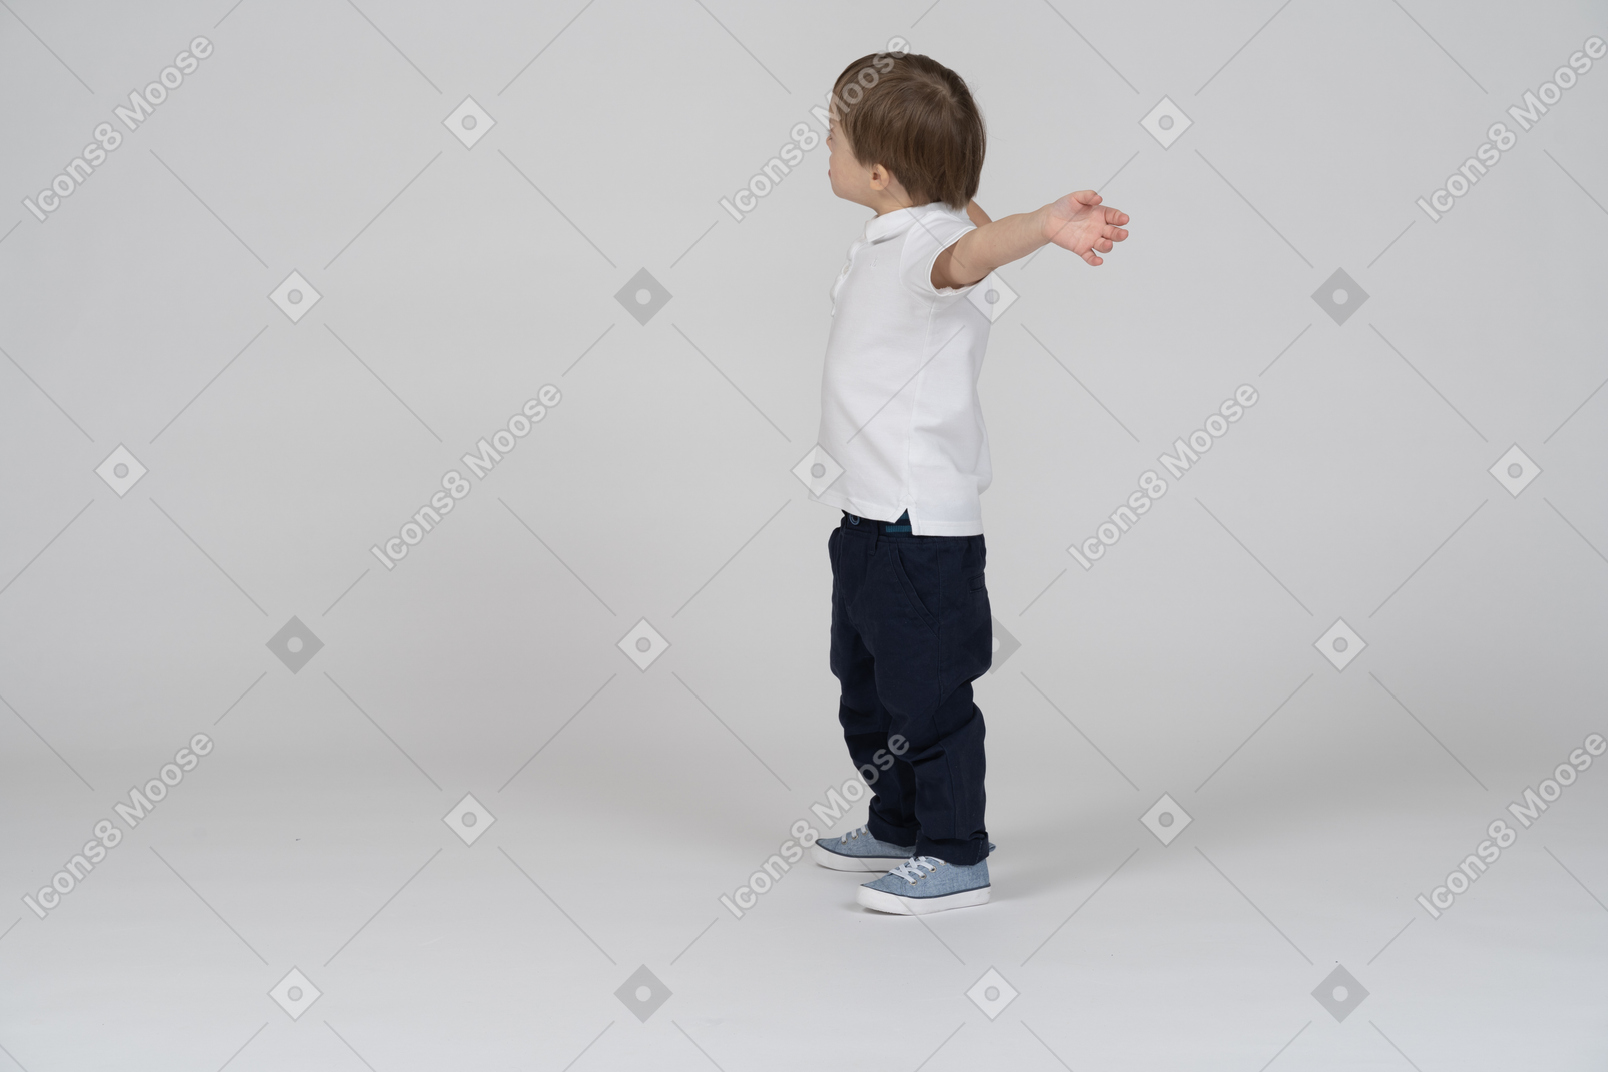 Side view of a boy looking away with hands raised